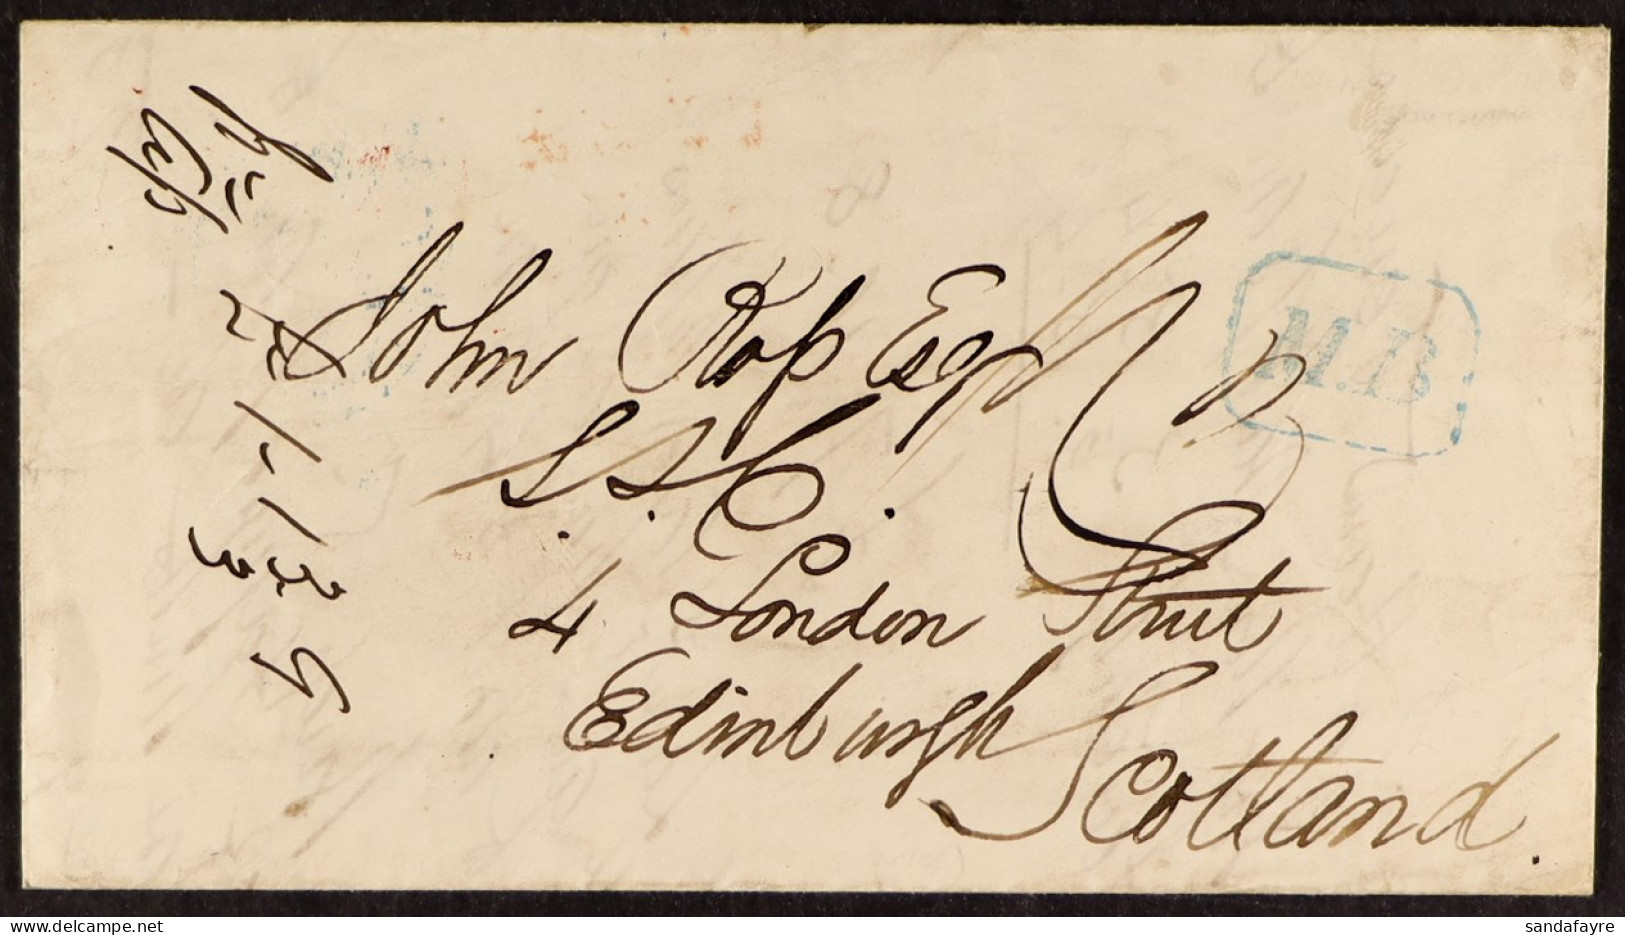 STAMP - SOUTHAMPTON MOBILE BOX 1847 (4th June) An Envelope Havre, France To Edinburgh From Southampton, A Letter Charged - ...-1840 Vorläufer